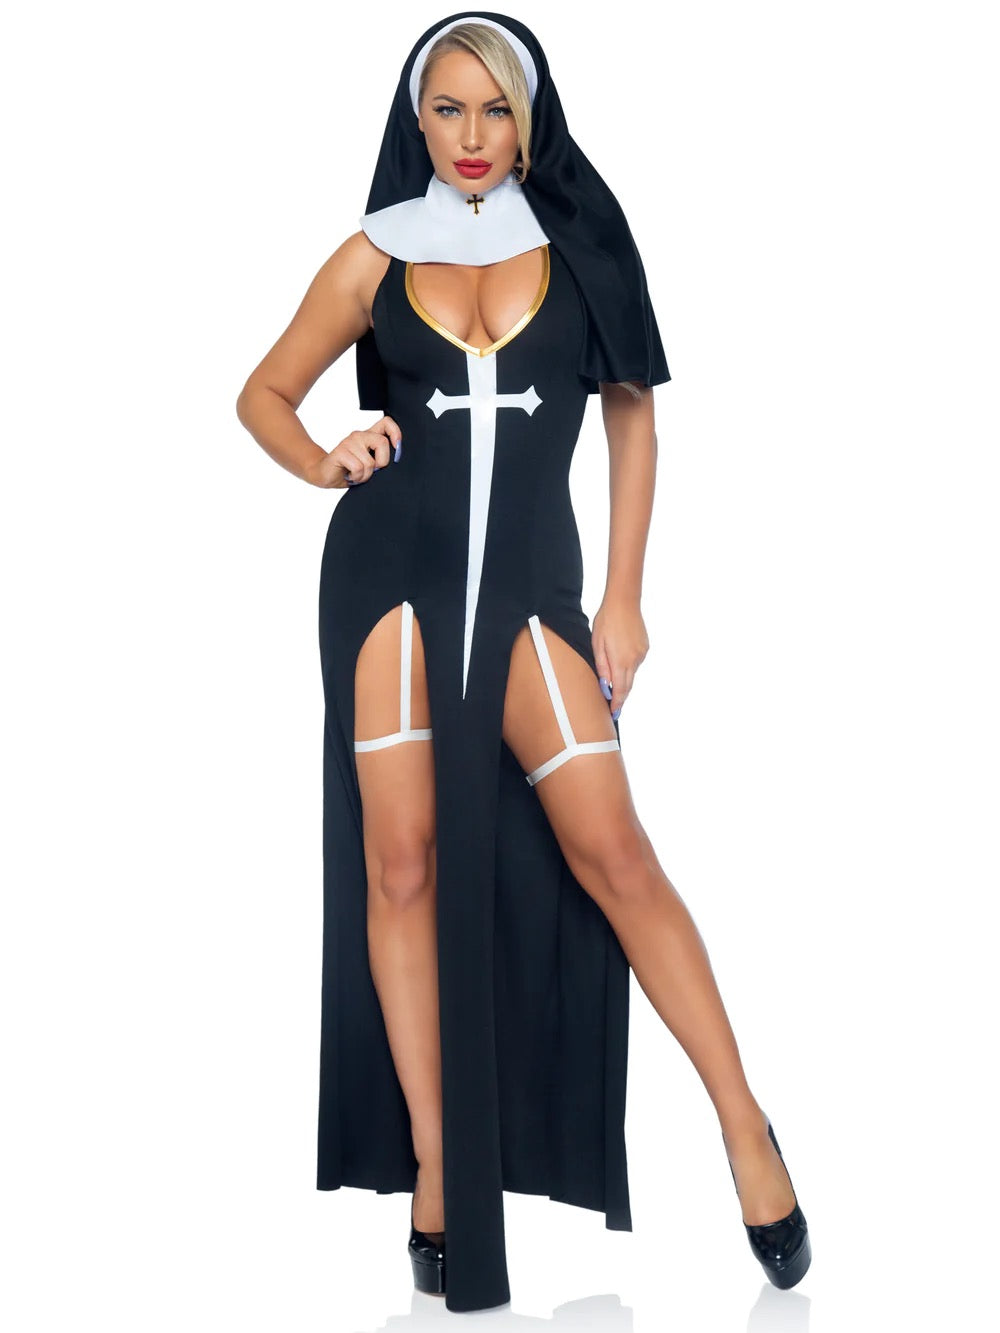 A model wearing the 3 pc. Sultry Sinner Nun Costume with black heels.